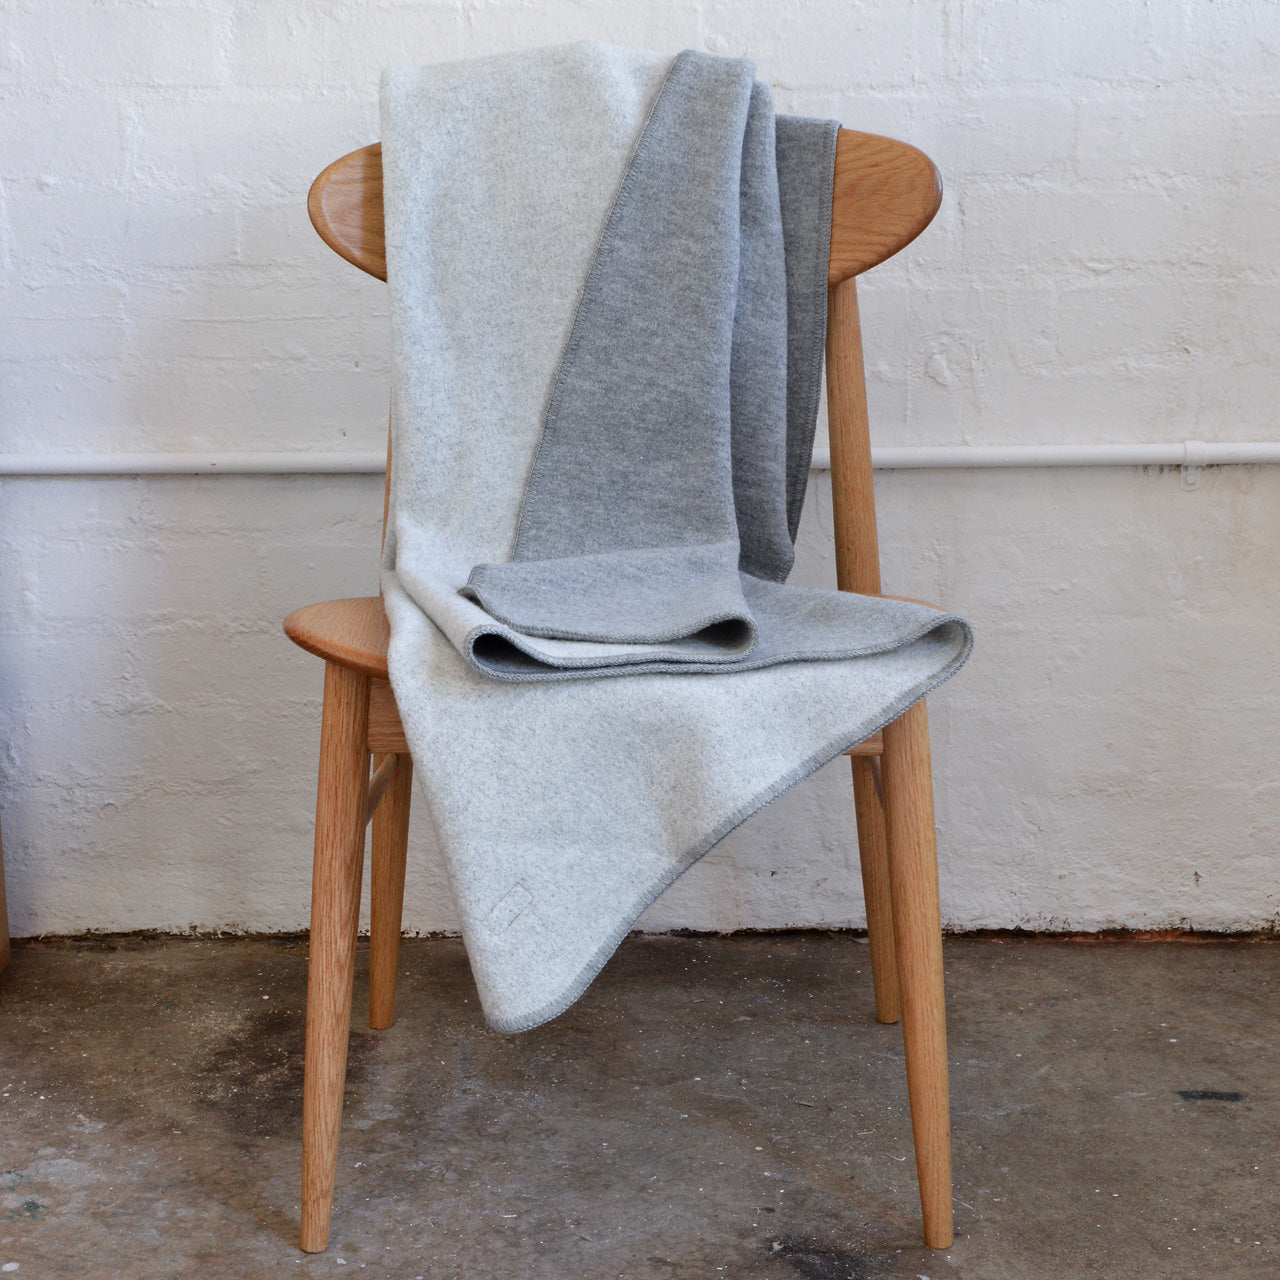 Double Faced Boiled Wool Blanket Organic Merino - Grey/Natural (200x135cm) *Last One!